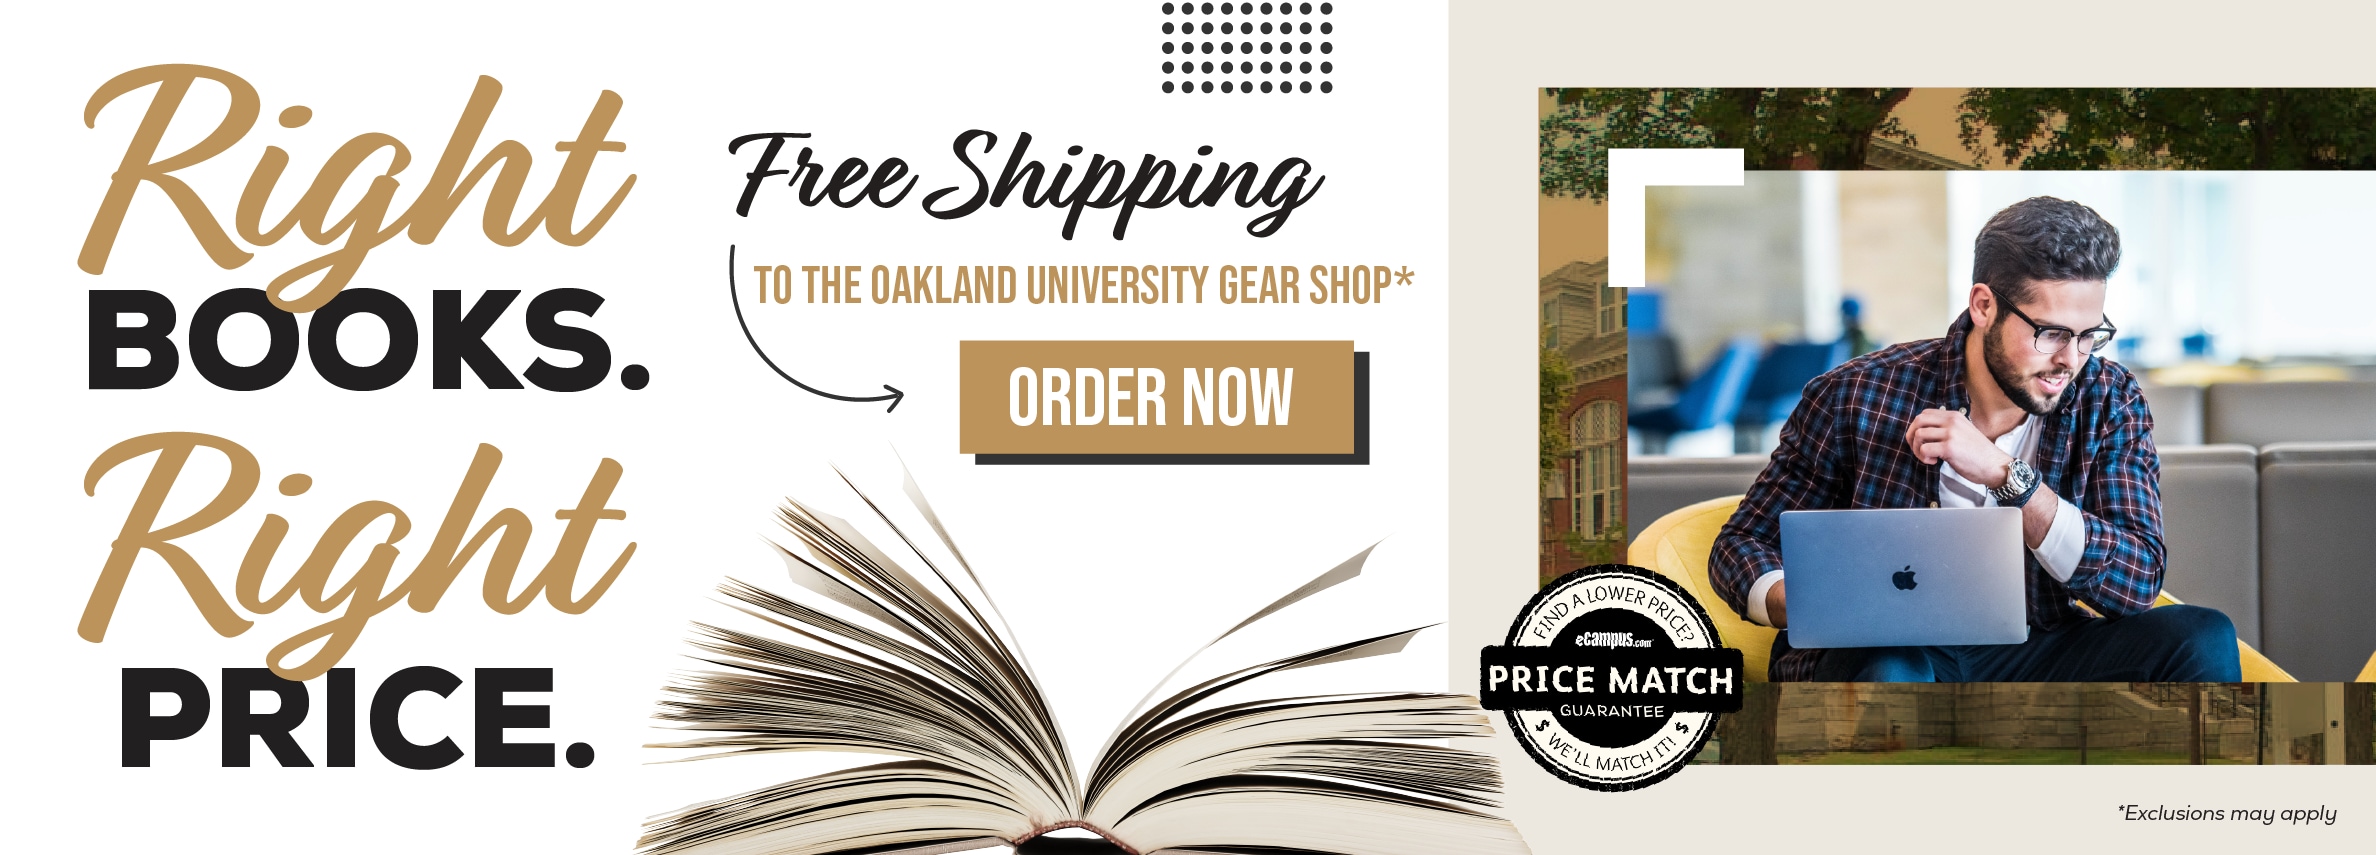 Right books. Right price. Free shipping to the Oakland University Gear Shop.* Order now. Price Match Guarantee. *Exclusions may apply.